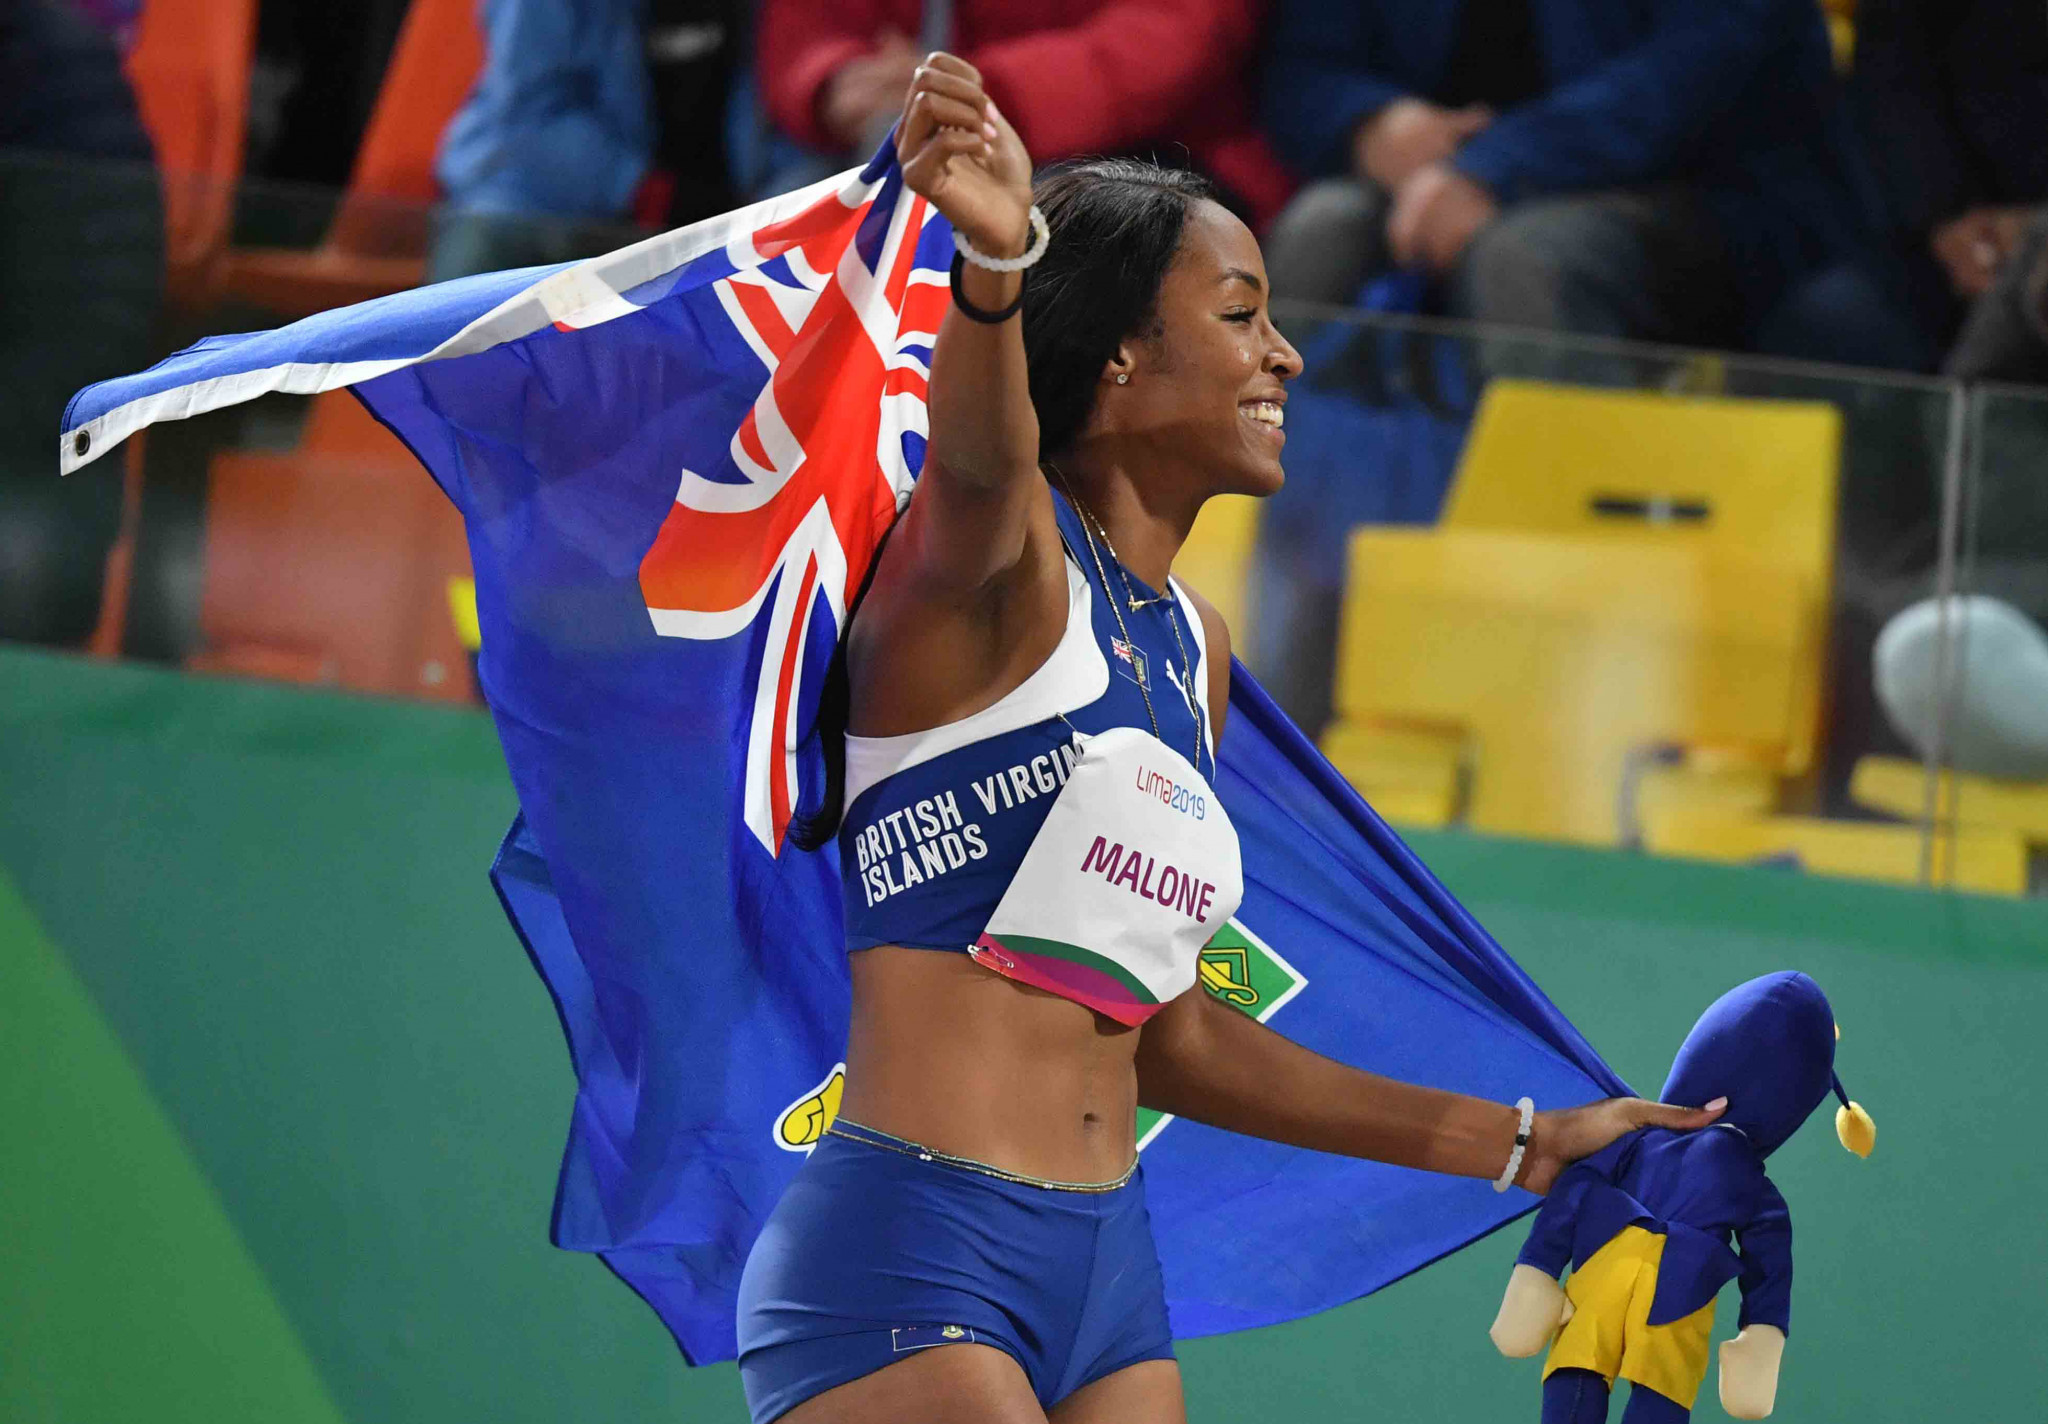 British Virgin Islands secure maiden Pan American Games medal with long jump gold